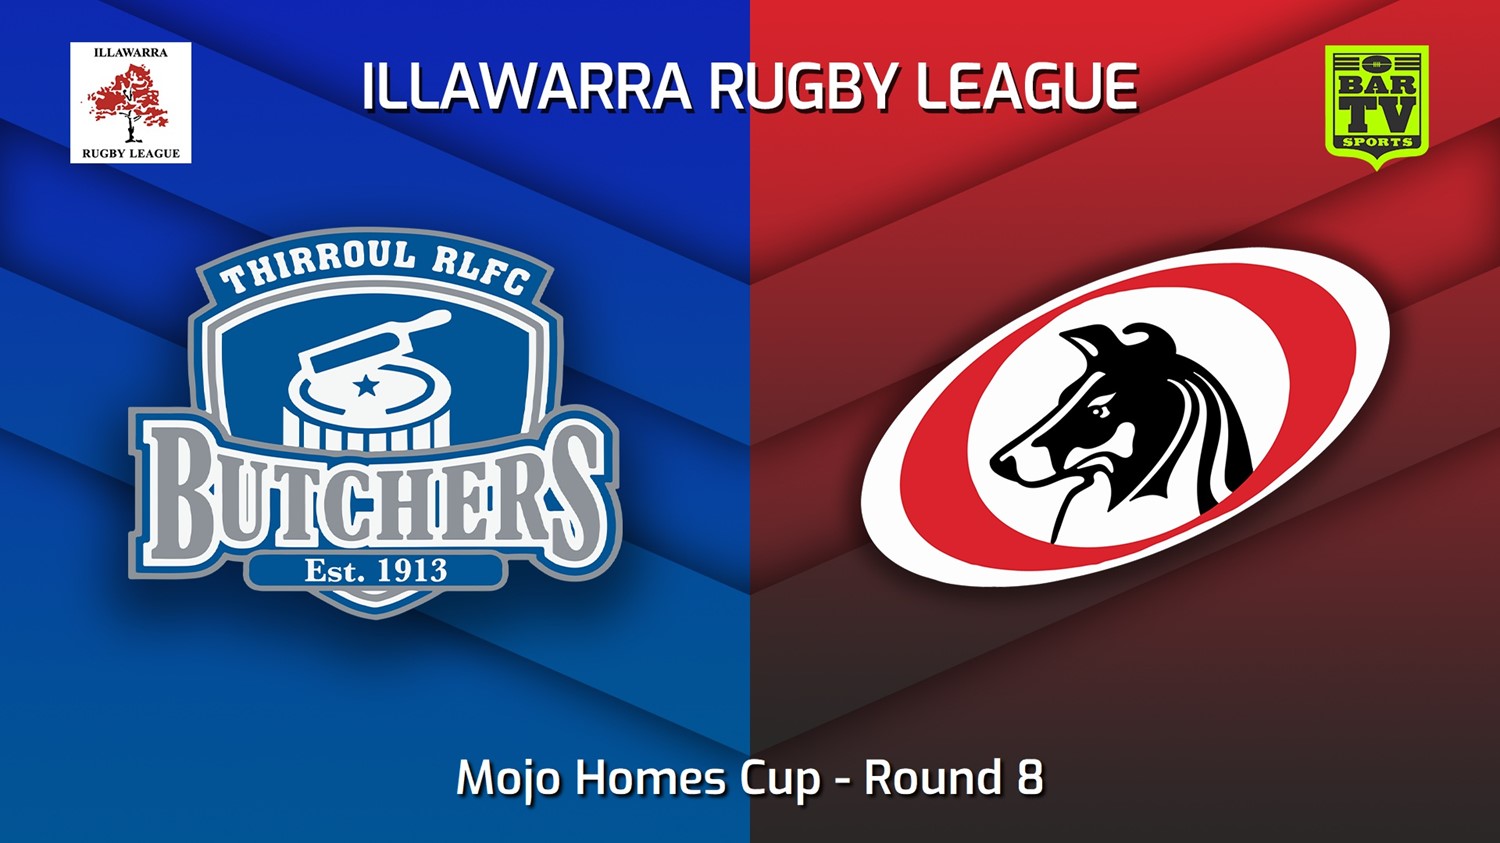 230624-Illawarra Round 8 - Mojo Homes Cup - Thirroul Butchers v Collegians Minigame Slate Image